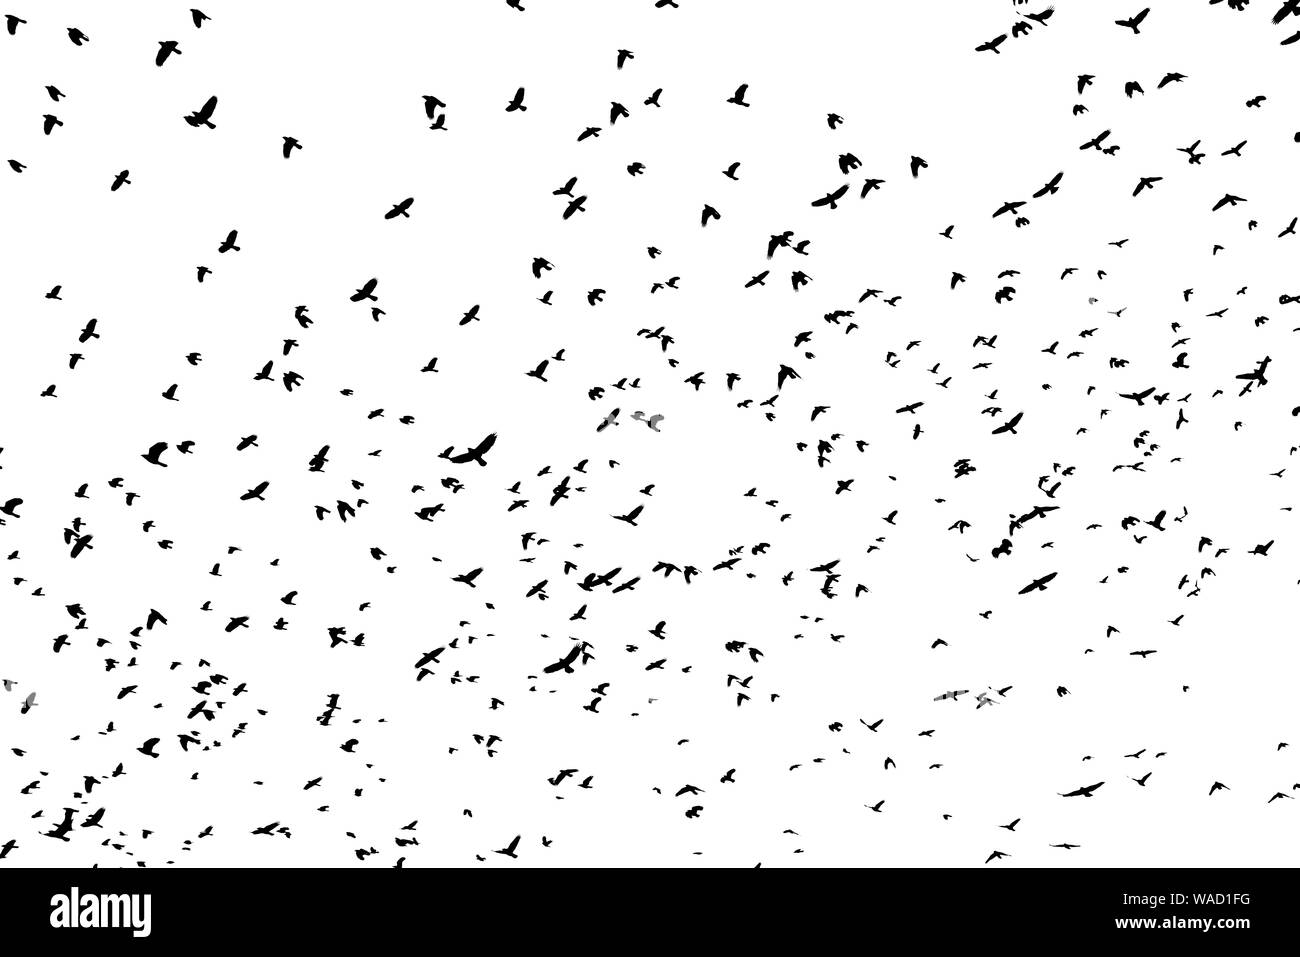 Large flock of black bird shapes flying silhouetted against white background. Stock Photo